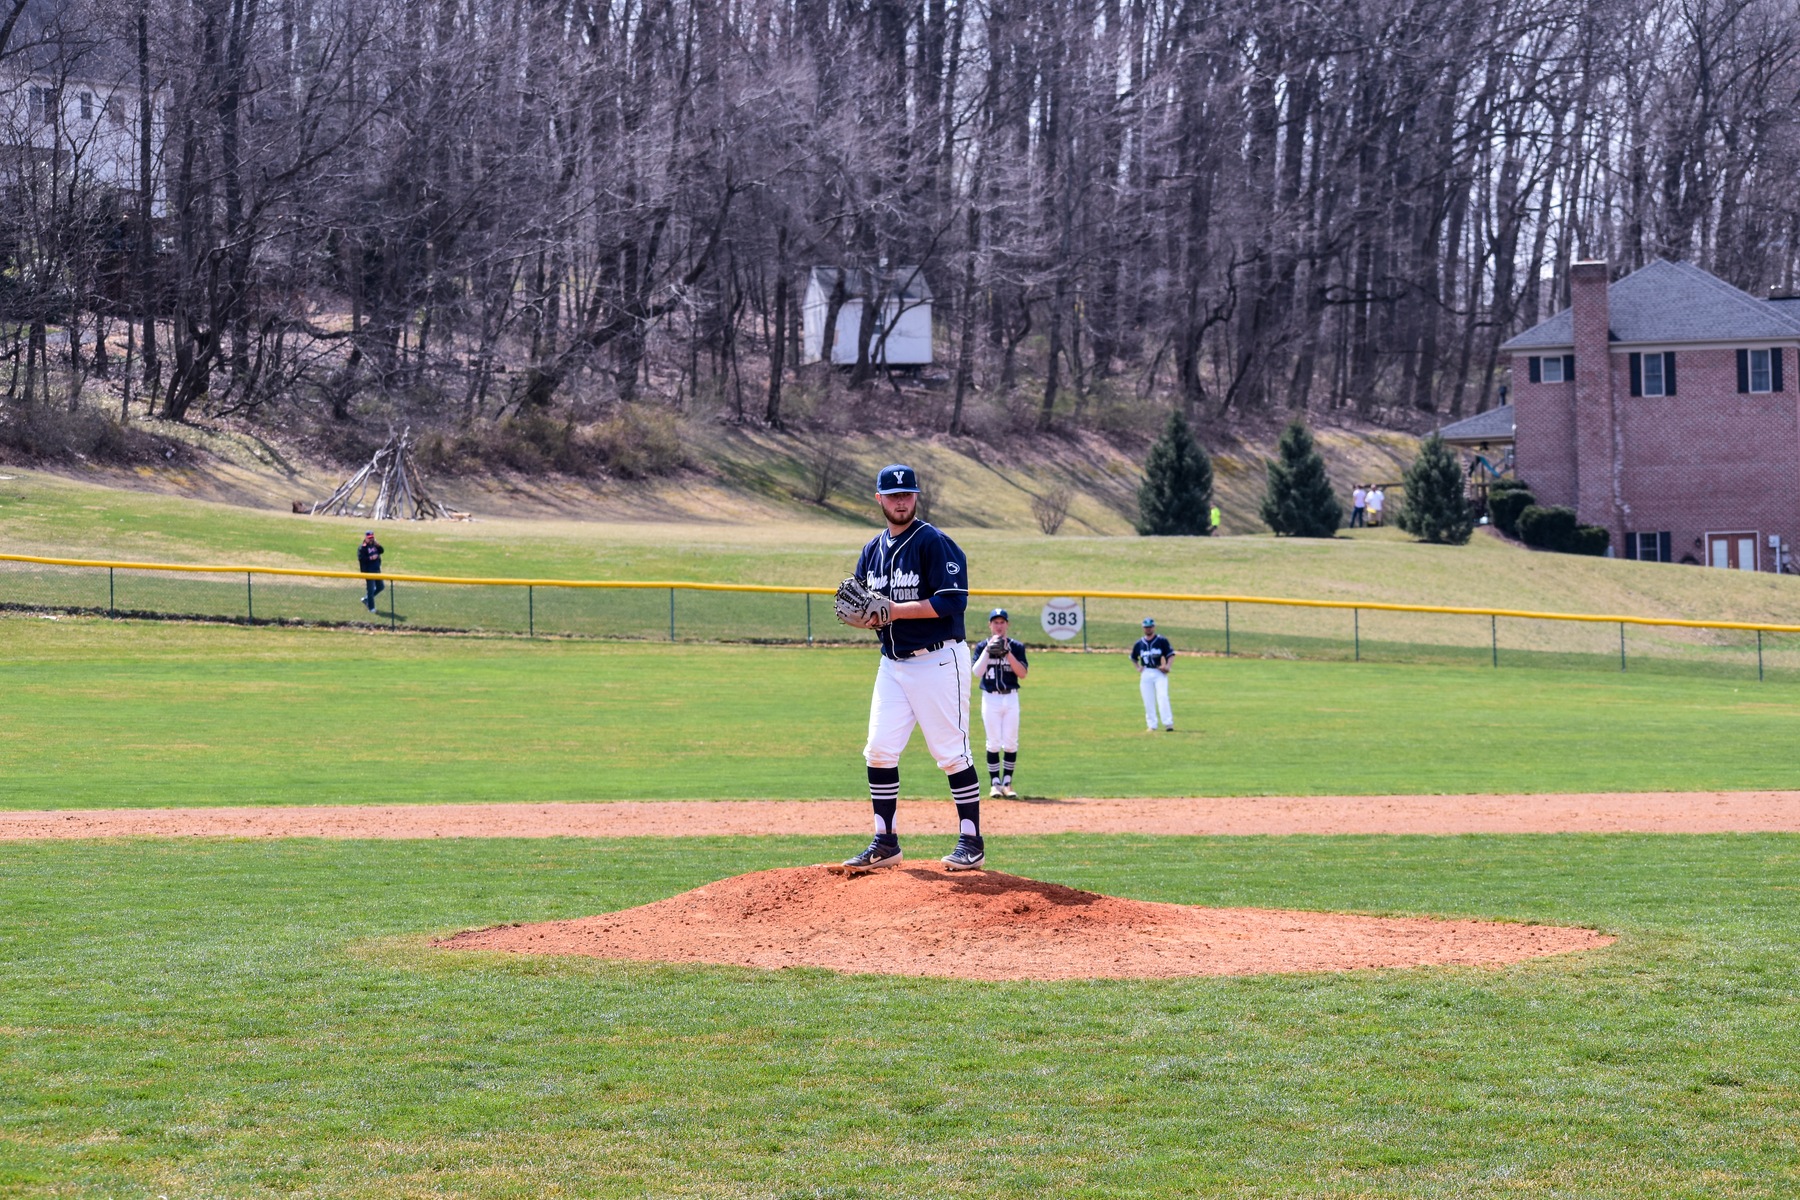 Brendon Delridge pitched a complete game for Penn State York in the 13-3 victory.